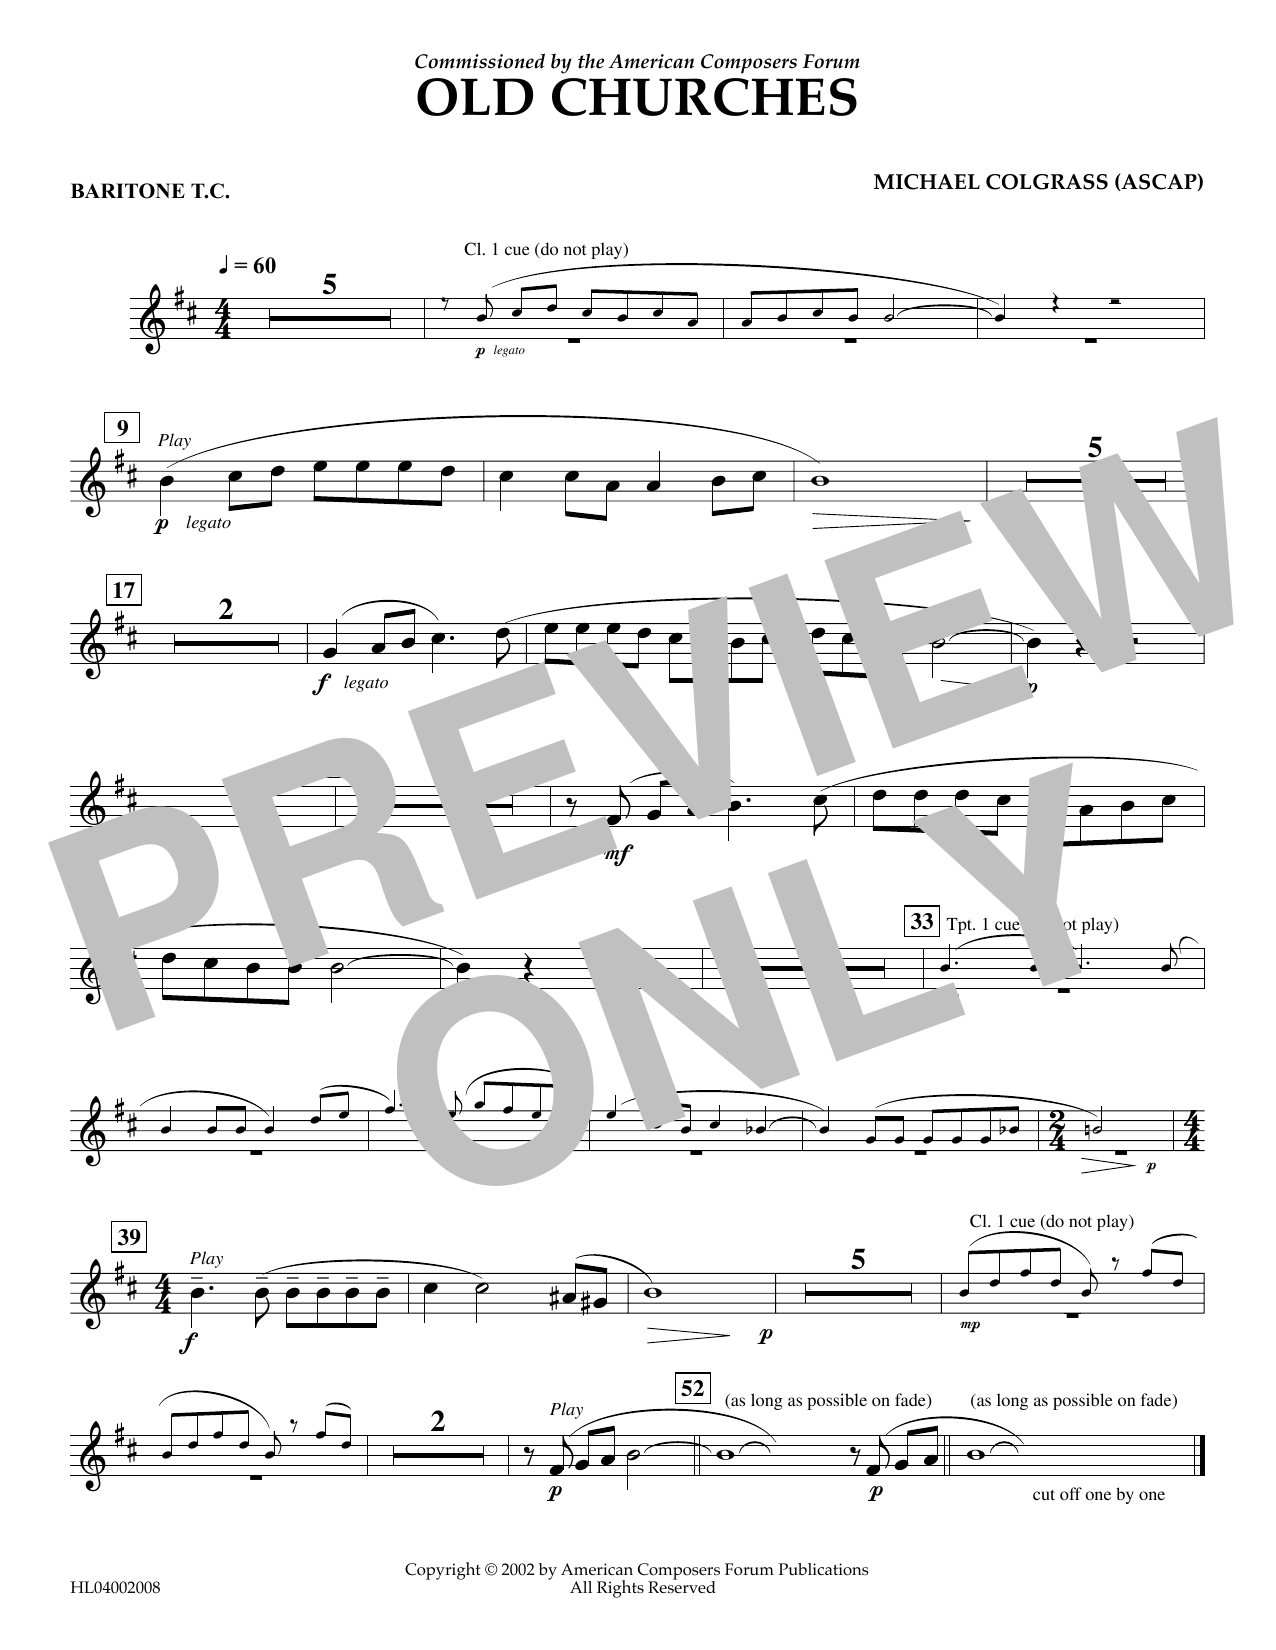 Download Michael Colgrass Old Churches - Euphonium in Treble Clef Sheet Music